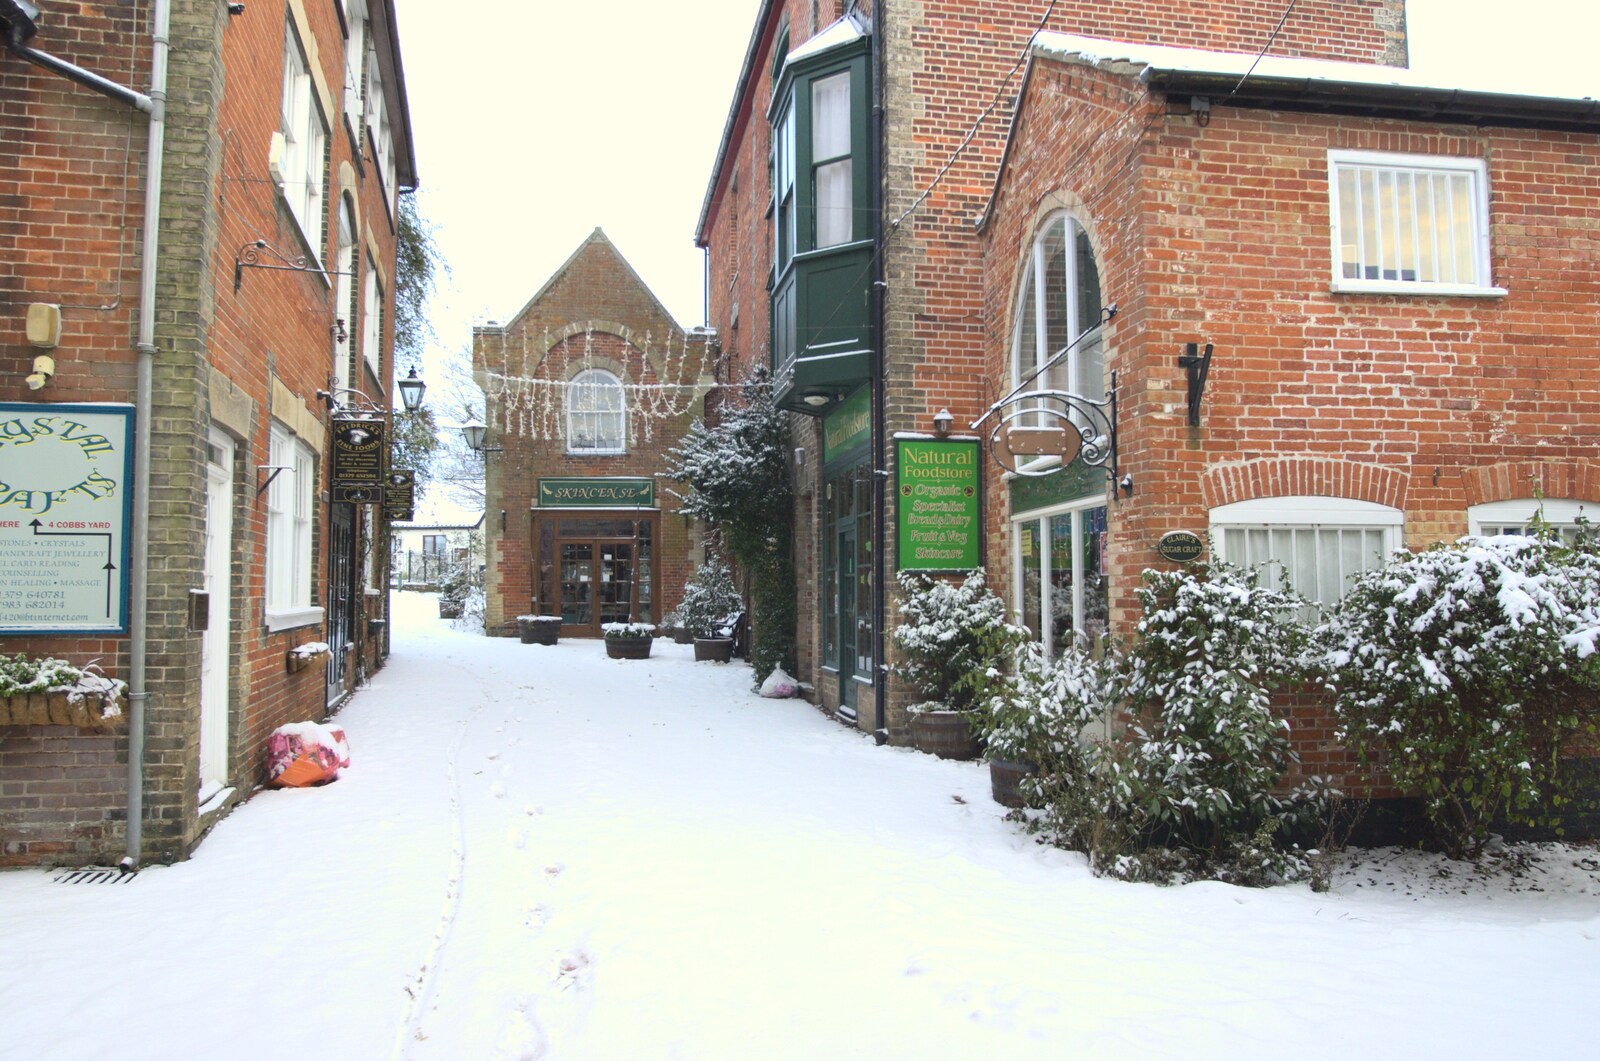 A Snowy Miscellany, Diss, Norfolk - 9th January 2010: Norfolk Yard